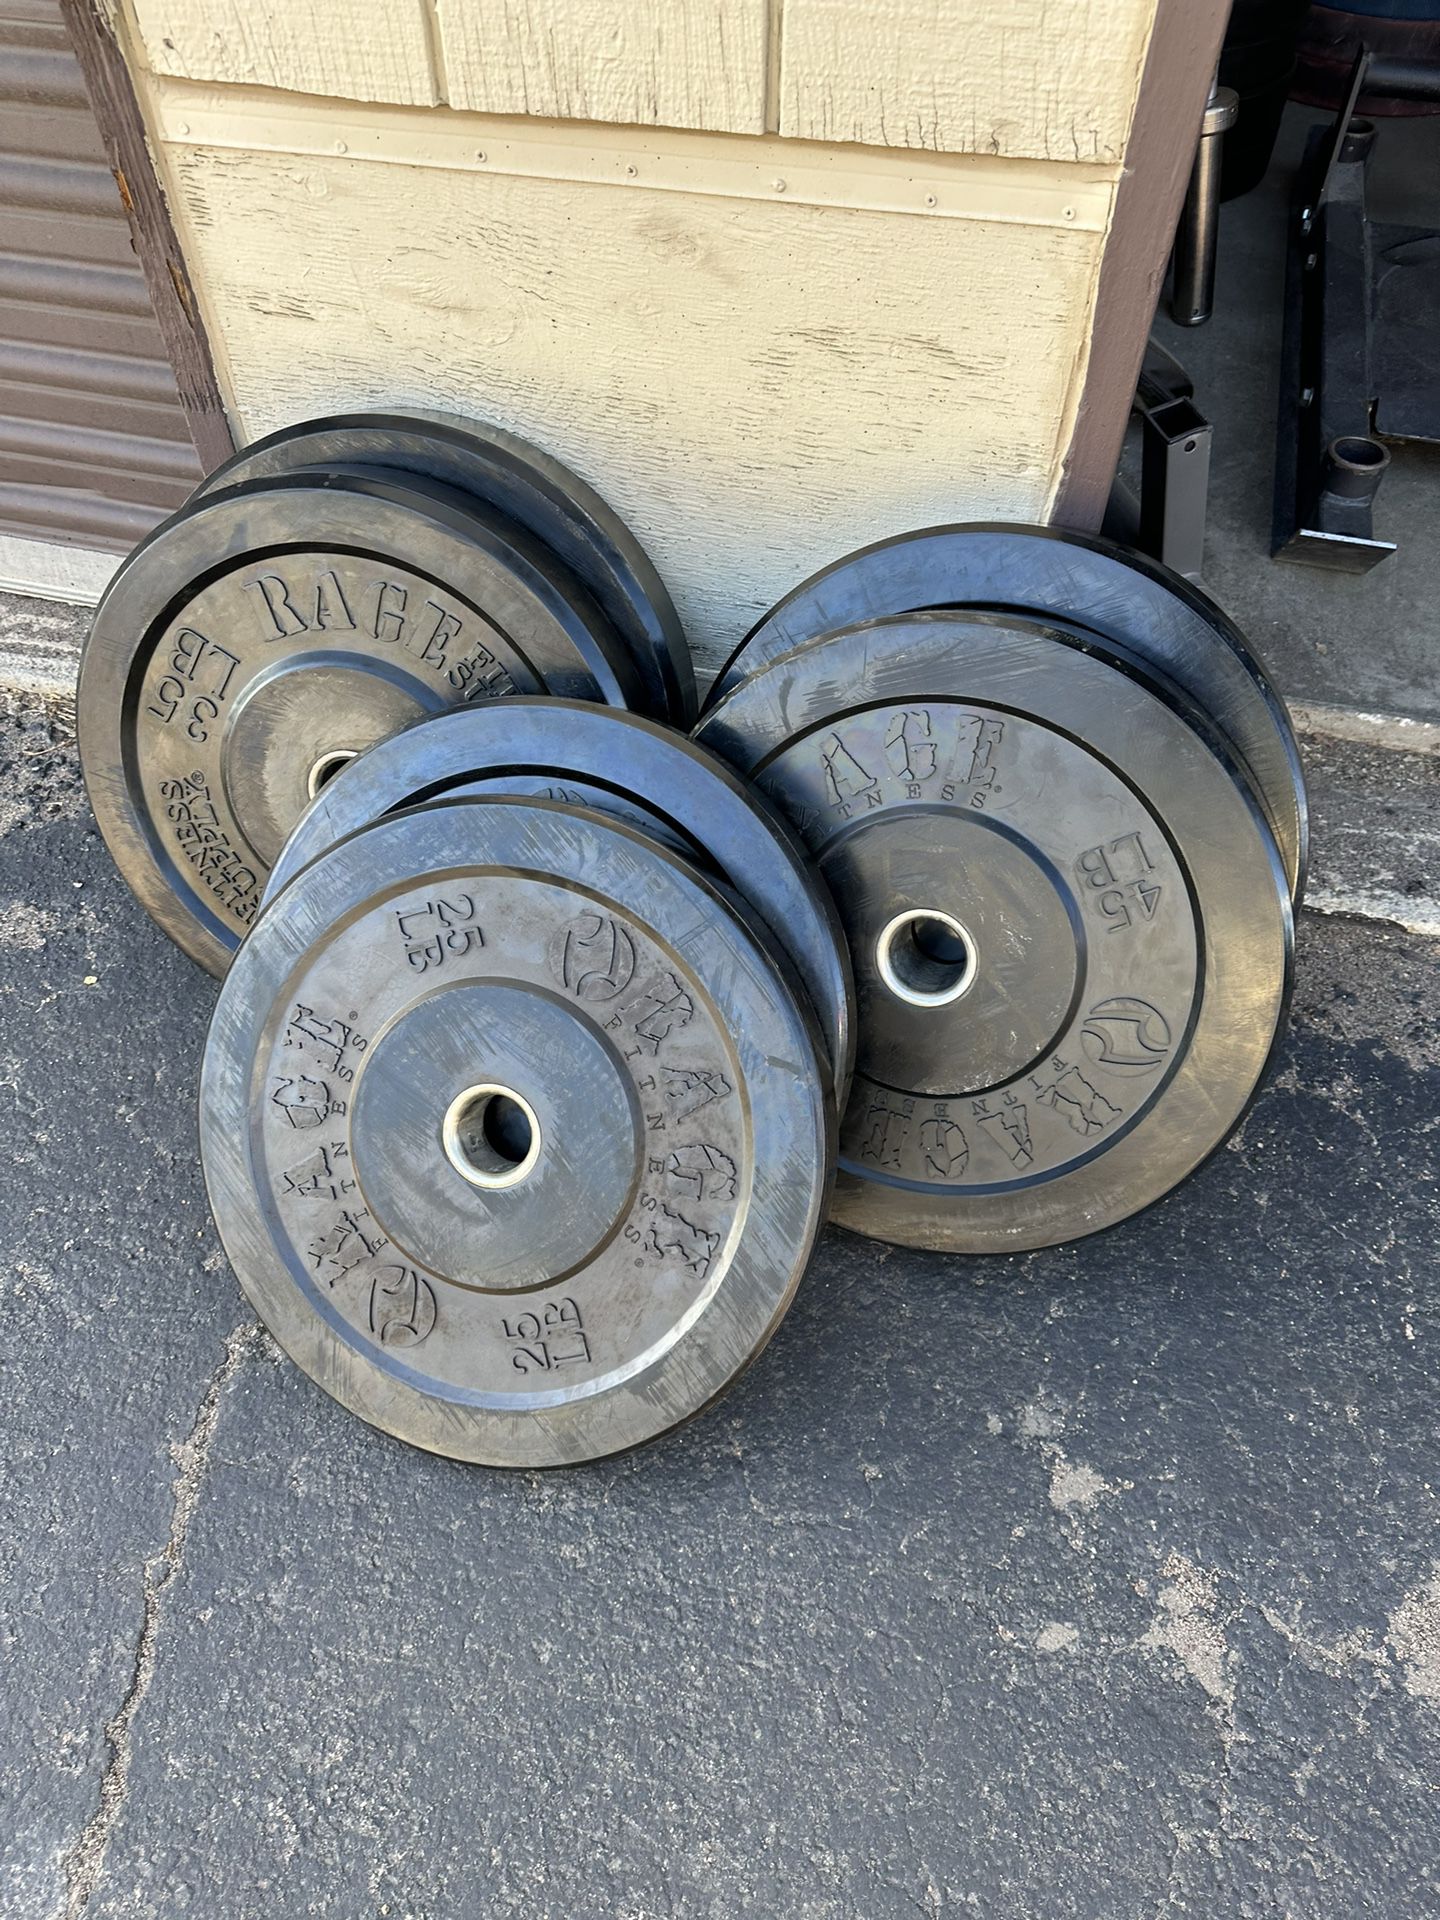 210lb Rage olympic rubber bumper weight set